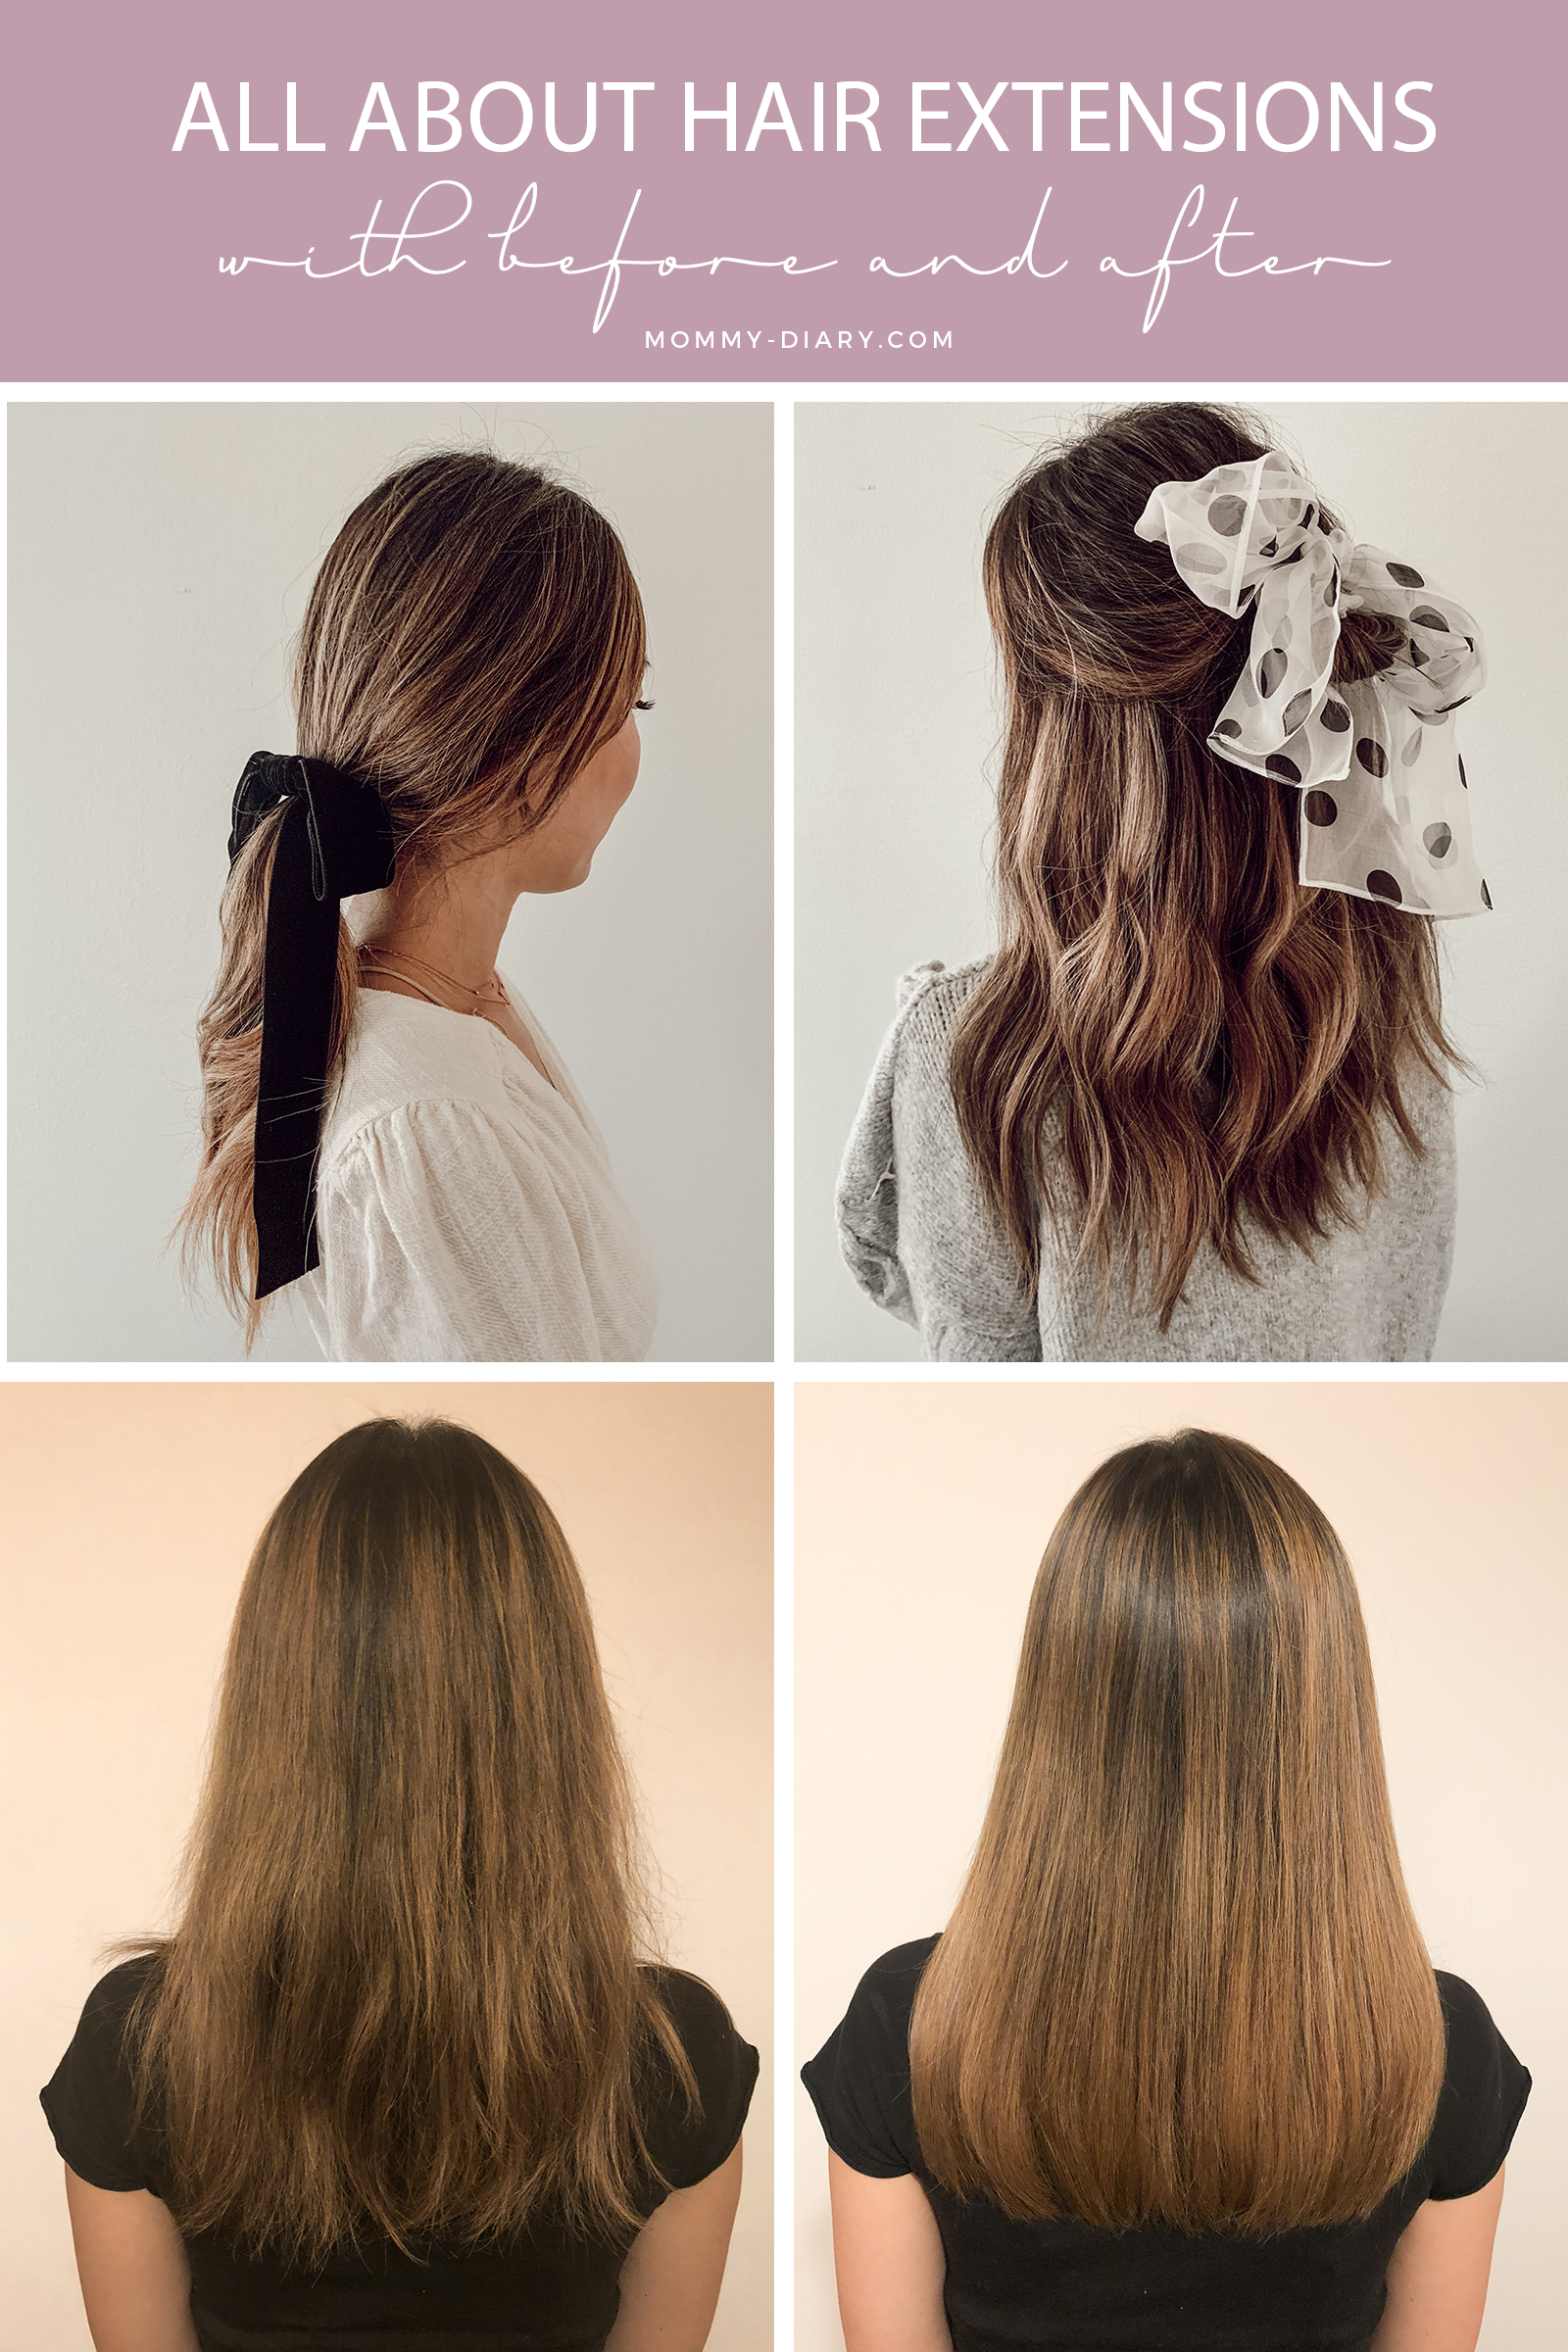 All about hair extensions with before & after